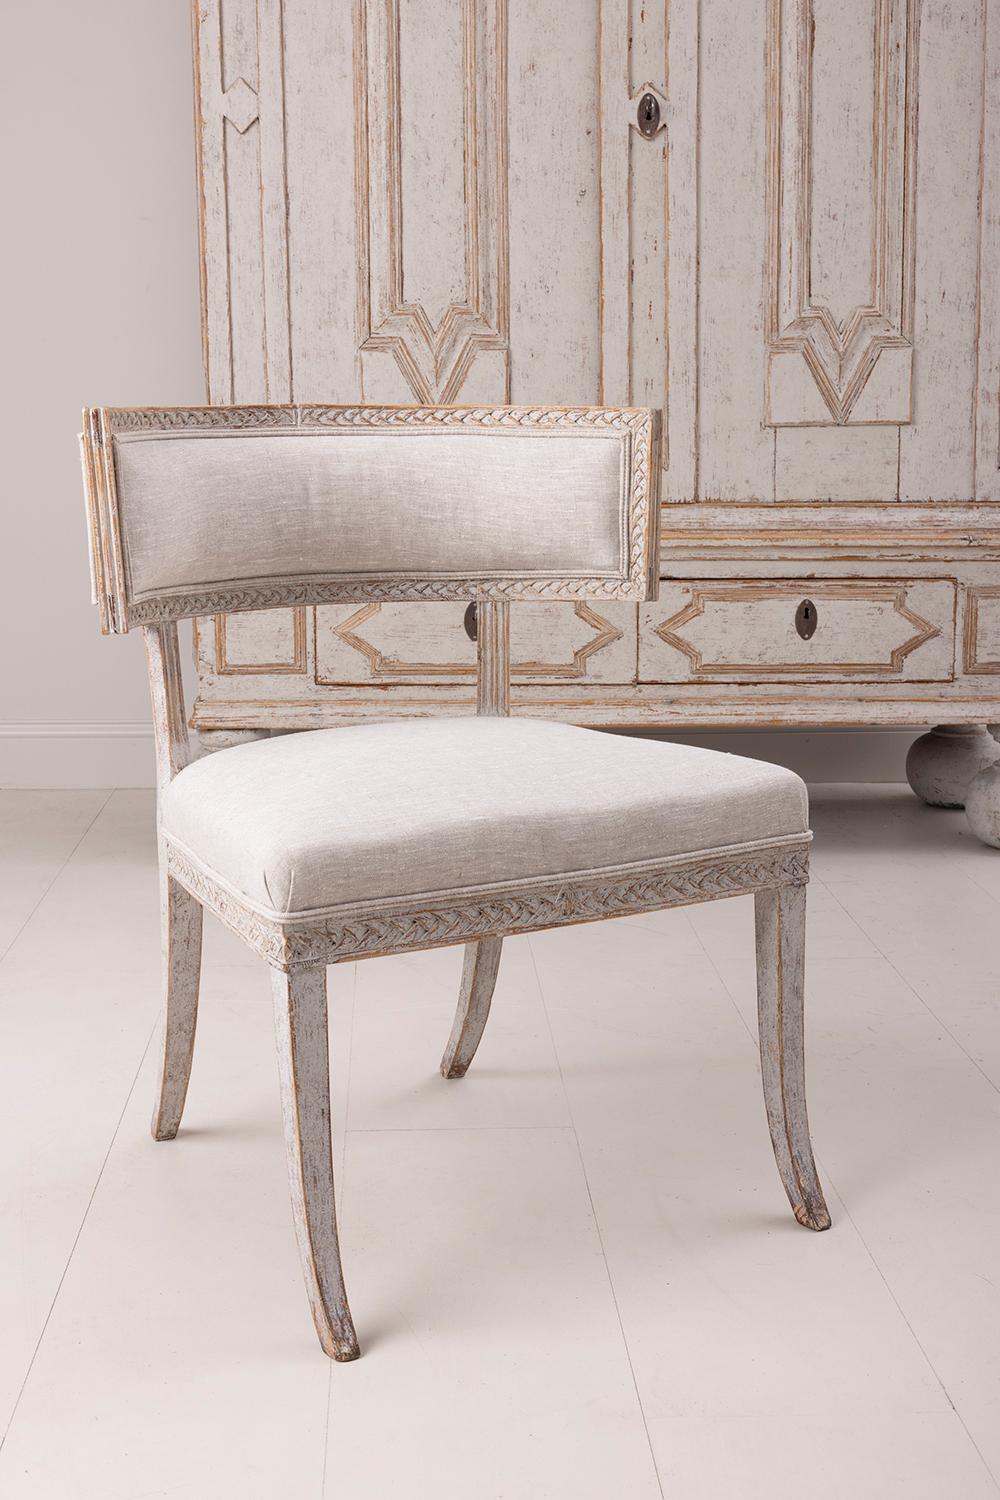 An early 19th century Klismos chair from the Gustavian period, newly upholstered in linen fabric. Made in Lindome, Sweden. The Klismos design originated in ancient Greece. The model is known for its curved and concave backrest and four splayed legs.